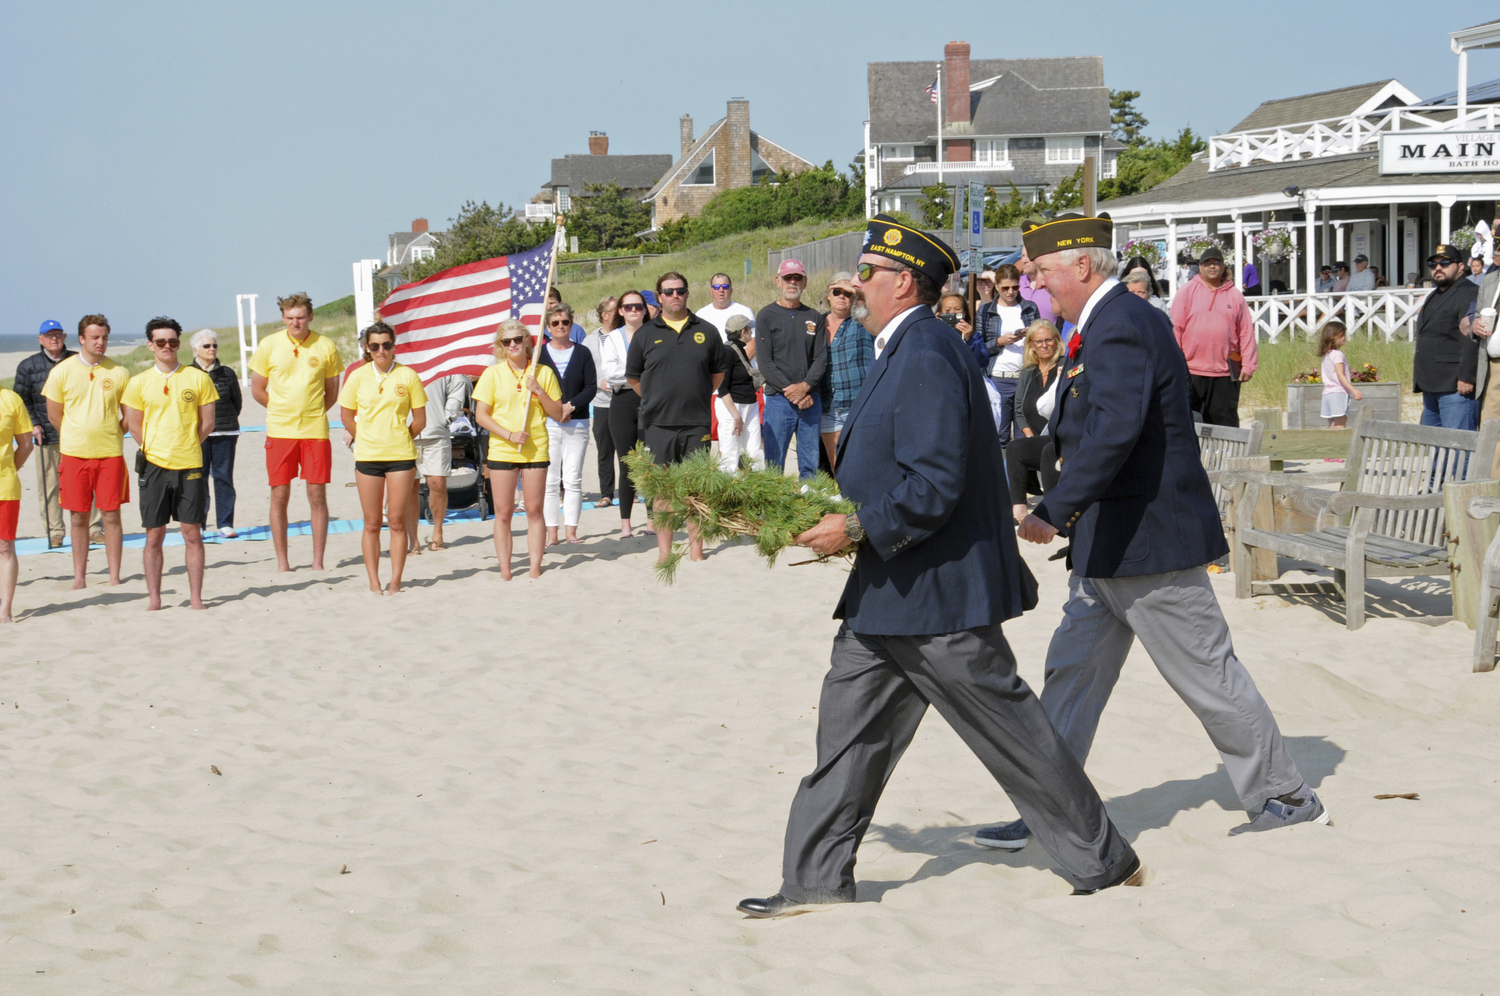 American Legion Post 419 Commander Jeff Kiger and Everit Albert Herter VFW Post 550 Commander Bill Mott take a wreath to the sea at the “Lost at Sea” Memorial Day service at Main Beach in East Hampton on Monday morning.  RICHARD LEWIN